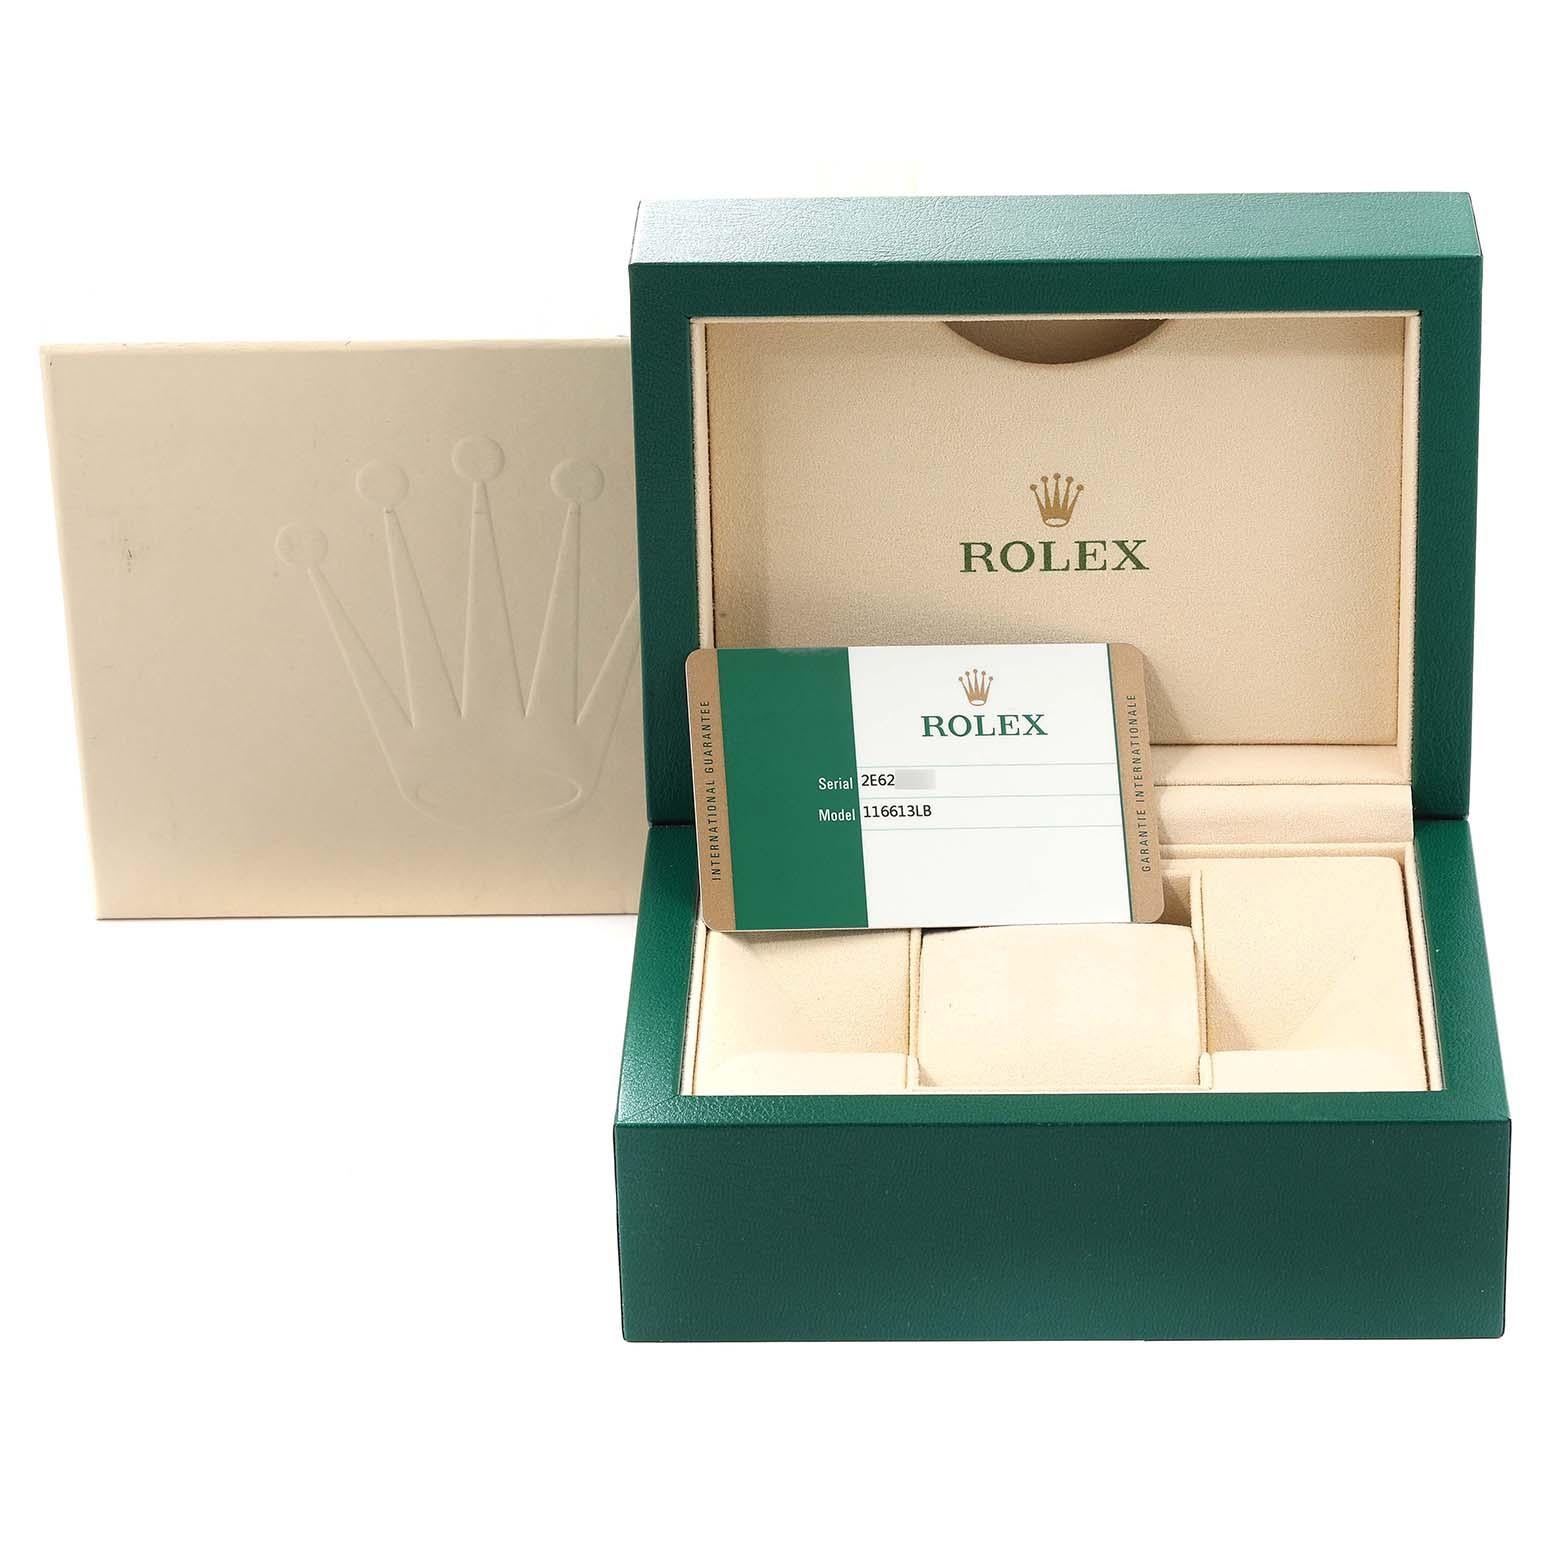 Rolex Submariner Steel Yellow Gold Blue Dial Mens Watch 116613 Box Card 7